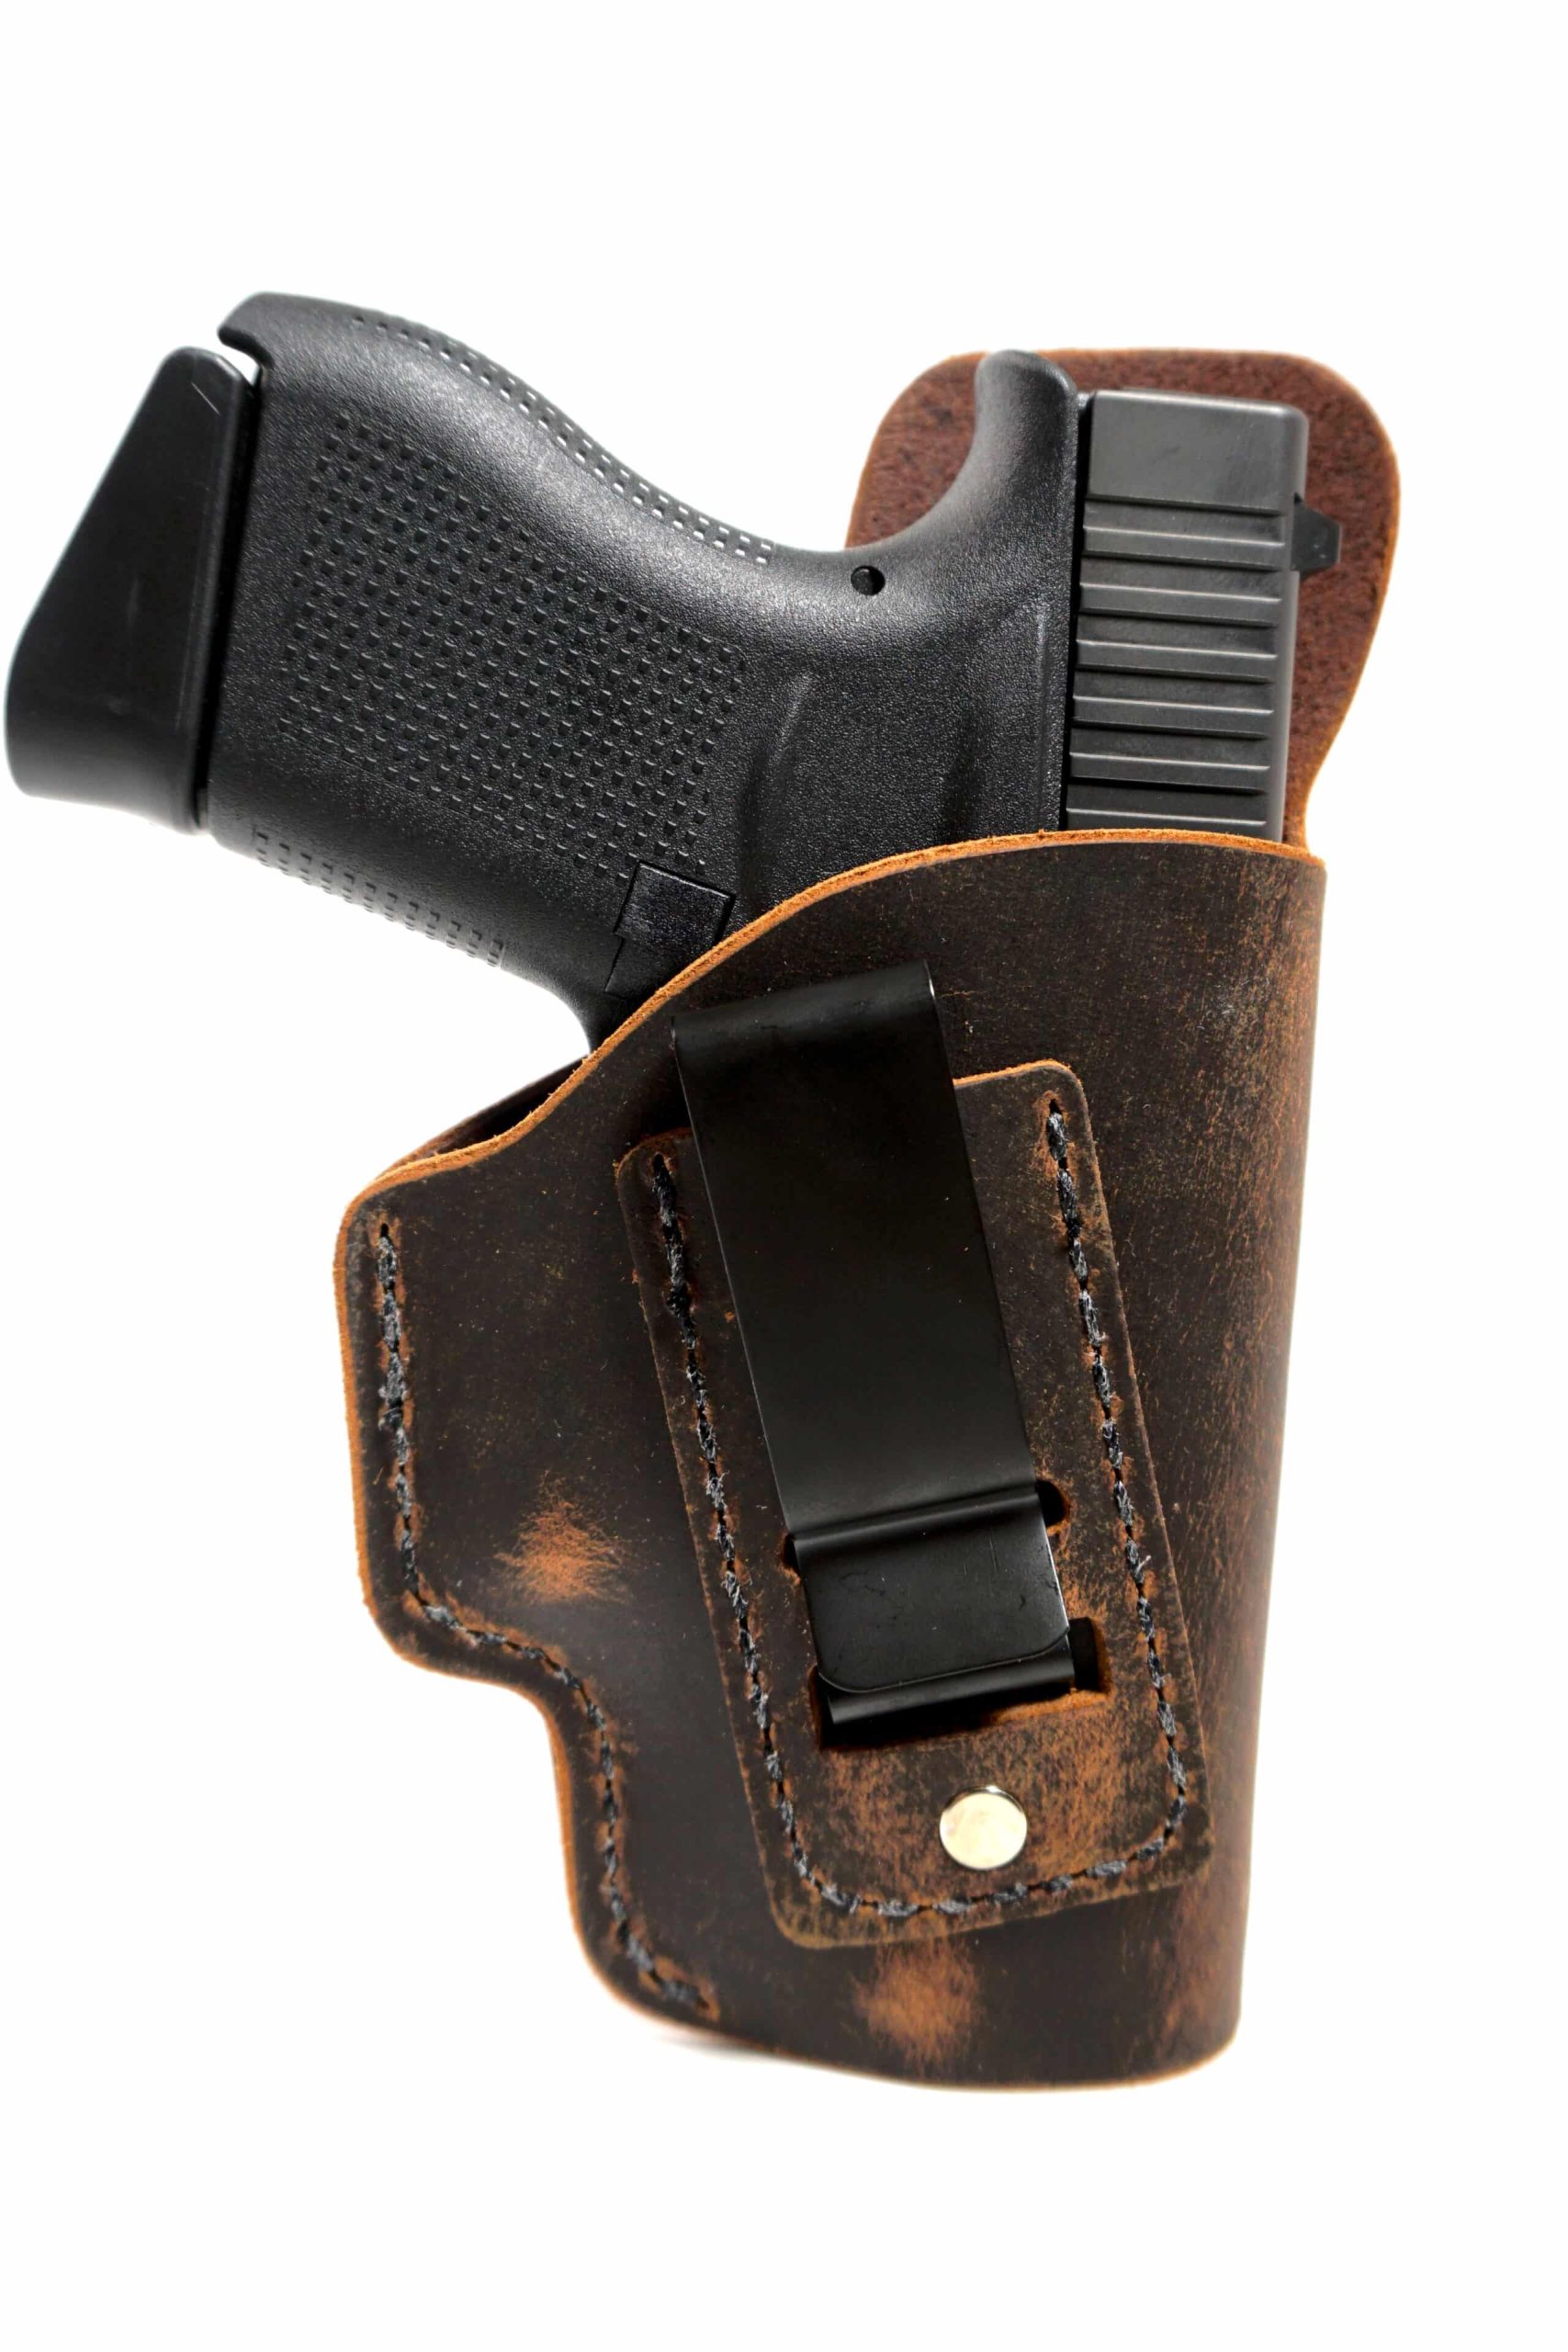 Sig Sauer 938 IWB Leather Holster - Concealed Carry Holster